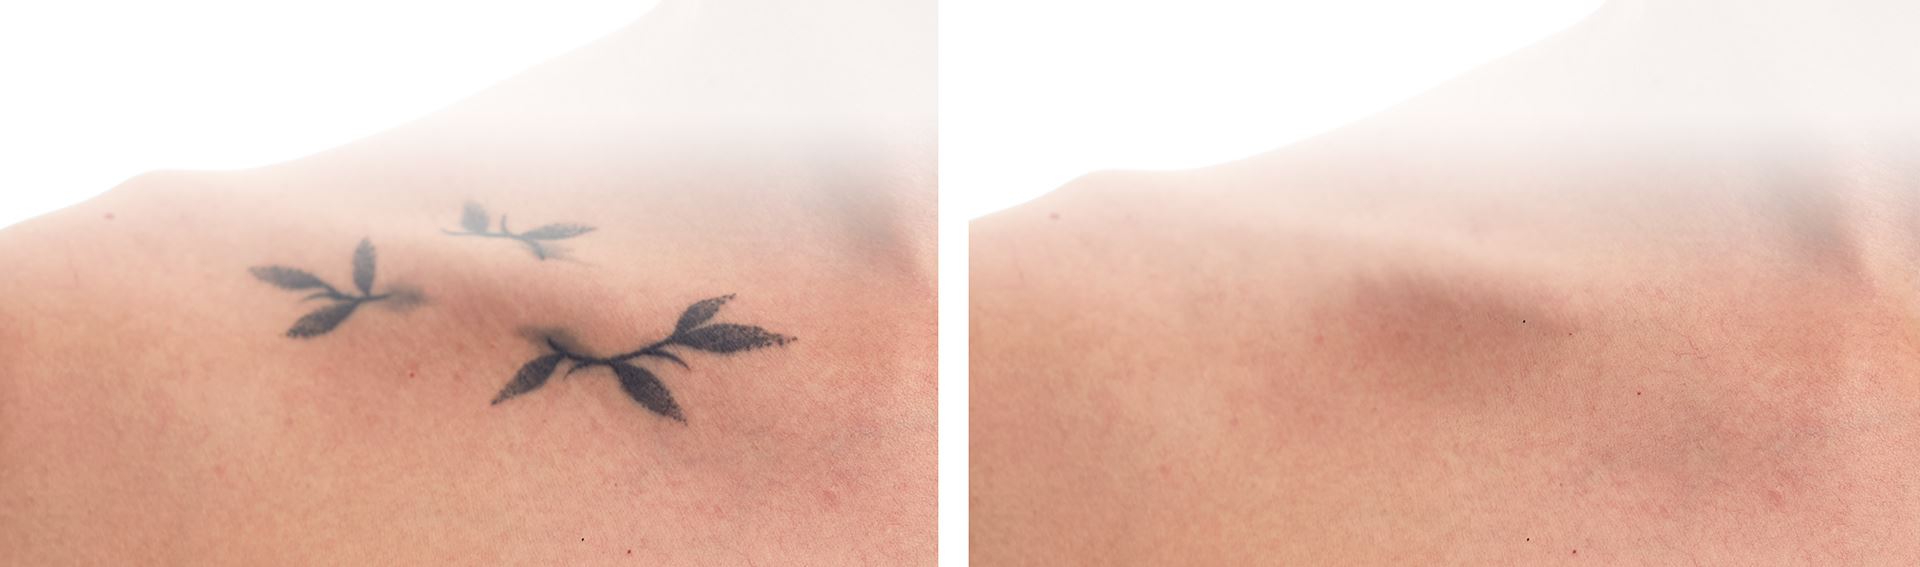 RETHINK YOUR INK LASER TATTOO REMOVAL  19 Photos  333 Boston Rd  Billerica Massachusetts  Tattoo Removal  Phone Number  Yelp